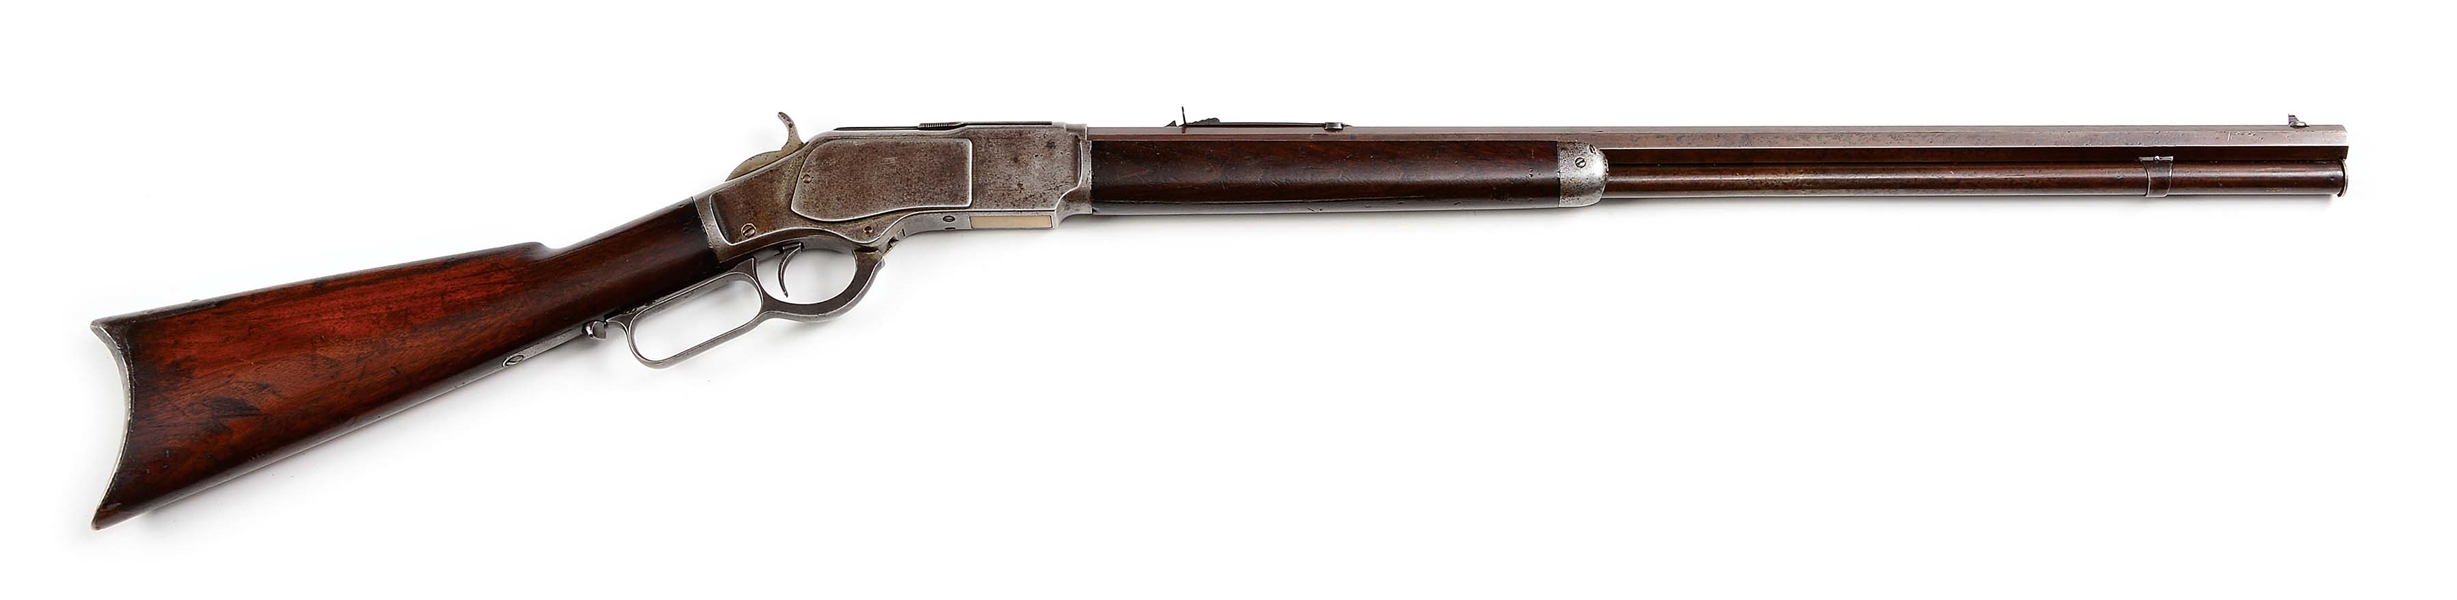 (A) SMALL BORE .22 LONG WINCHESTER MODEL 1873 LEVER ACTION RIFLE (1892).